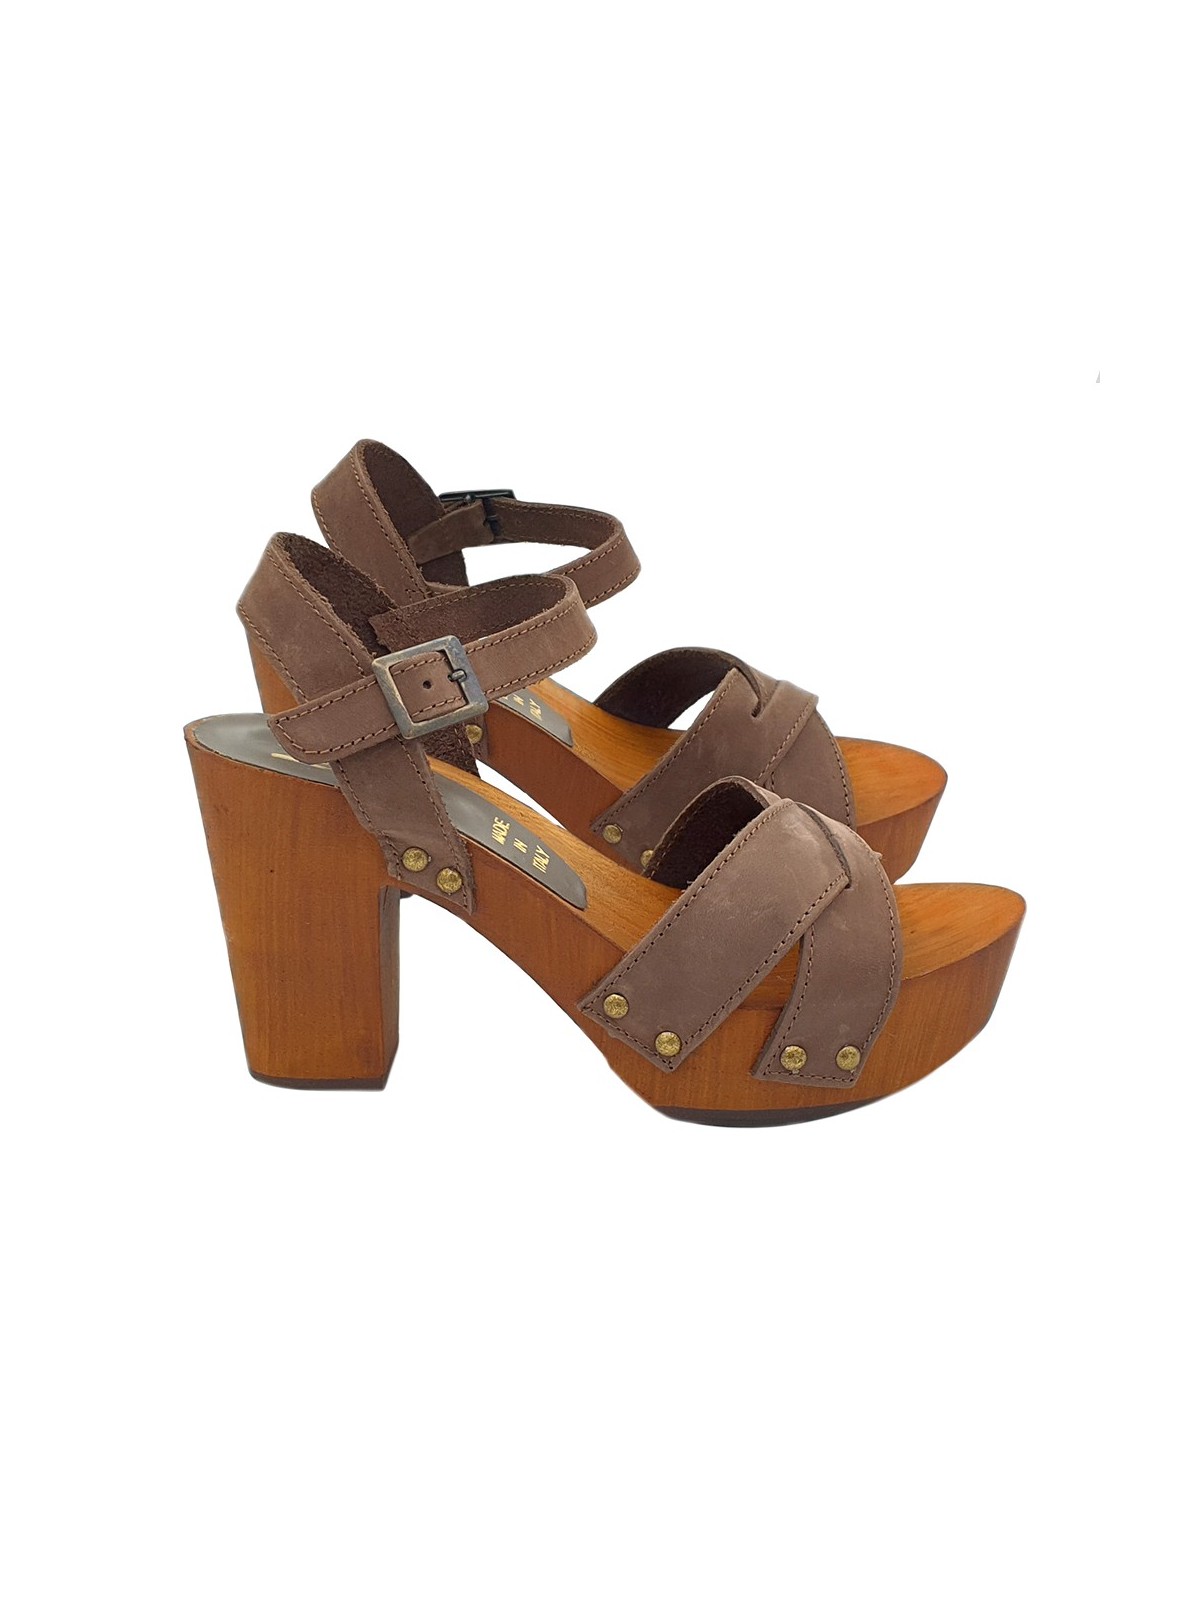 CLOGS TAUPE IN LEATHER HEEL 9